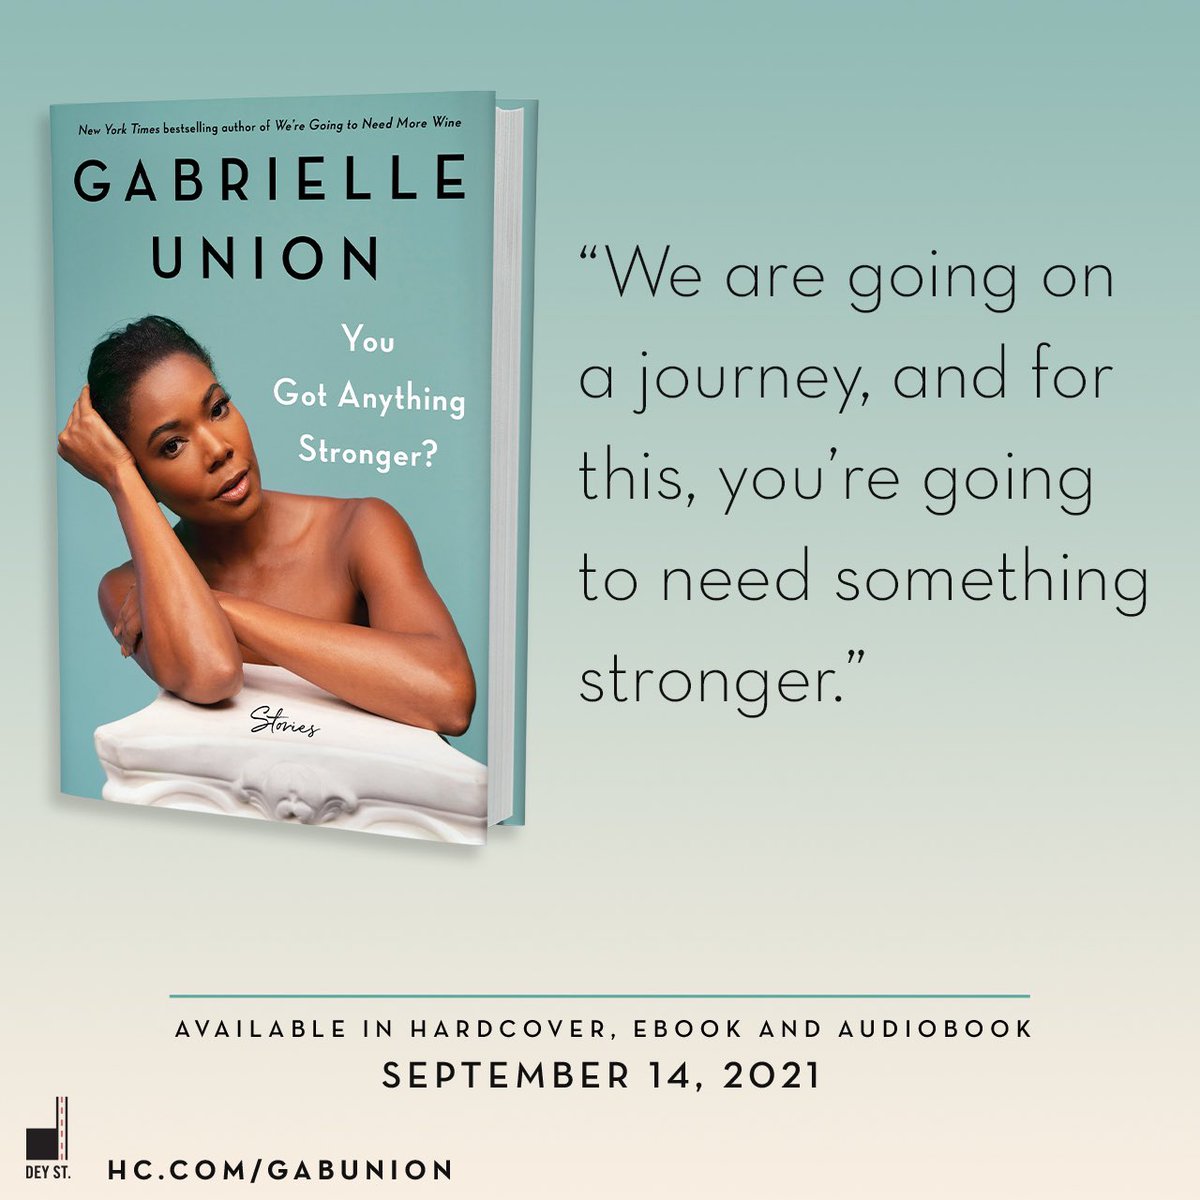 Gabrielle Union on X: On Sept. 14th, shit gets real. You won't want to  miss a thing. Pre-ordering a copy of YOU GOT ANYTHING STRONGER? here:    / X